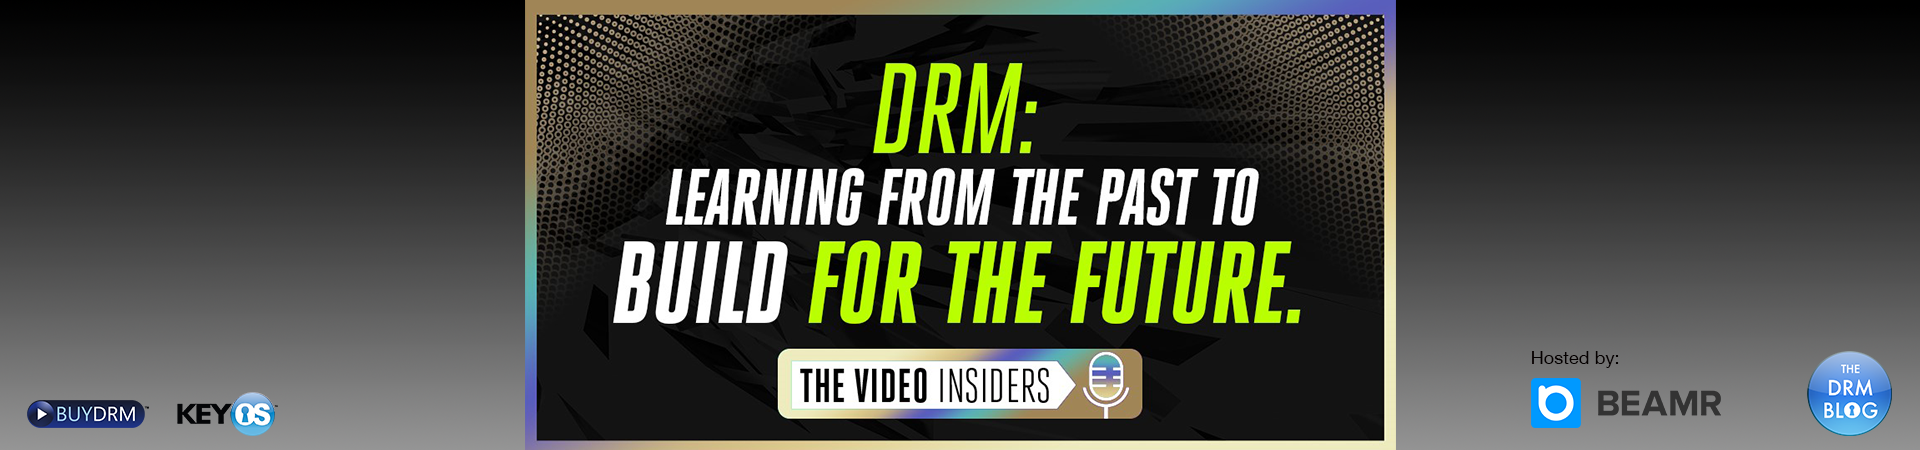 DRM Learning from the past_1920x450_DesktopSlider.png